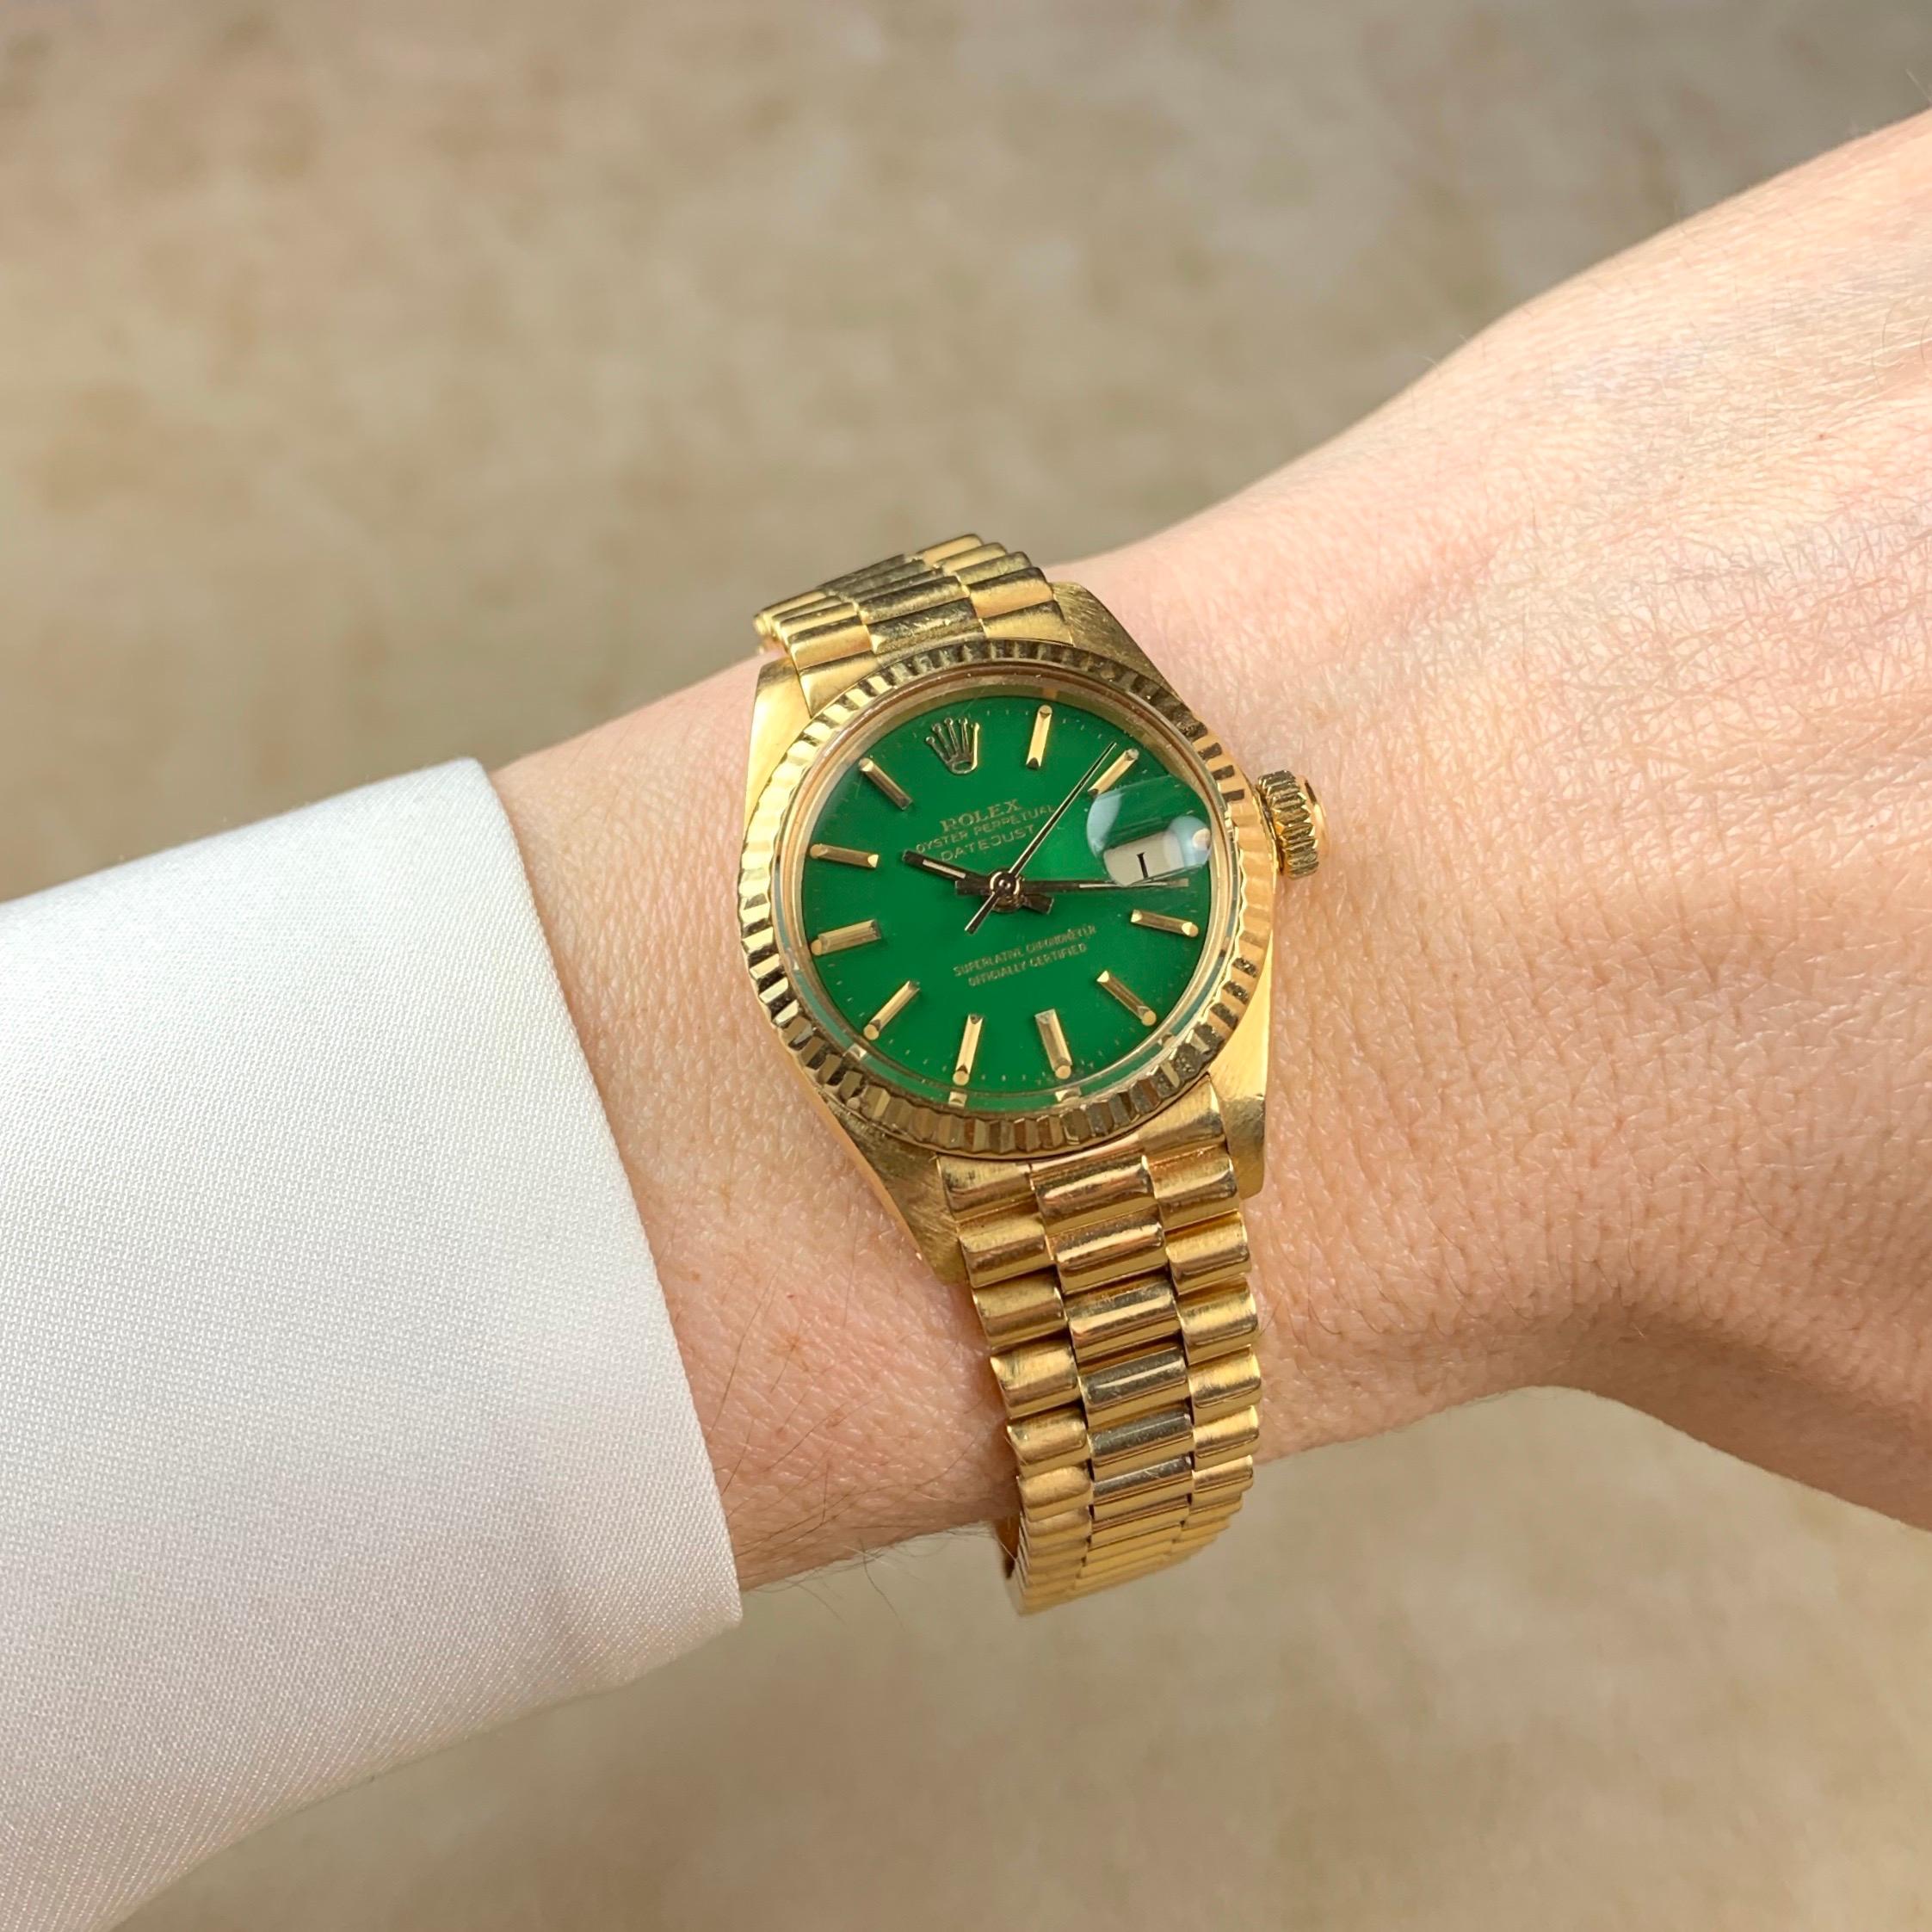 Green with Envy.

Rolex 18K Yellow Gold Ladies Oyster Perpetual Datejust with Green Stella Dial and Original Box and Papers

The Rolex Ladies Oyster Perpetual Datejust is timeless. It exudes femininity, confidence, and a playful side. It is all